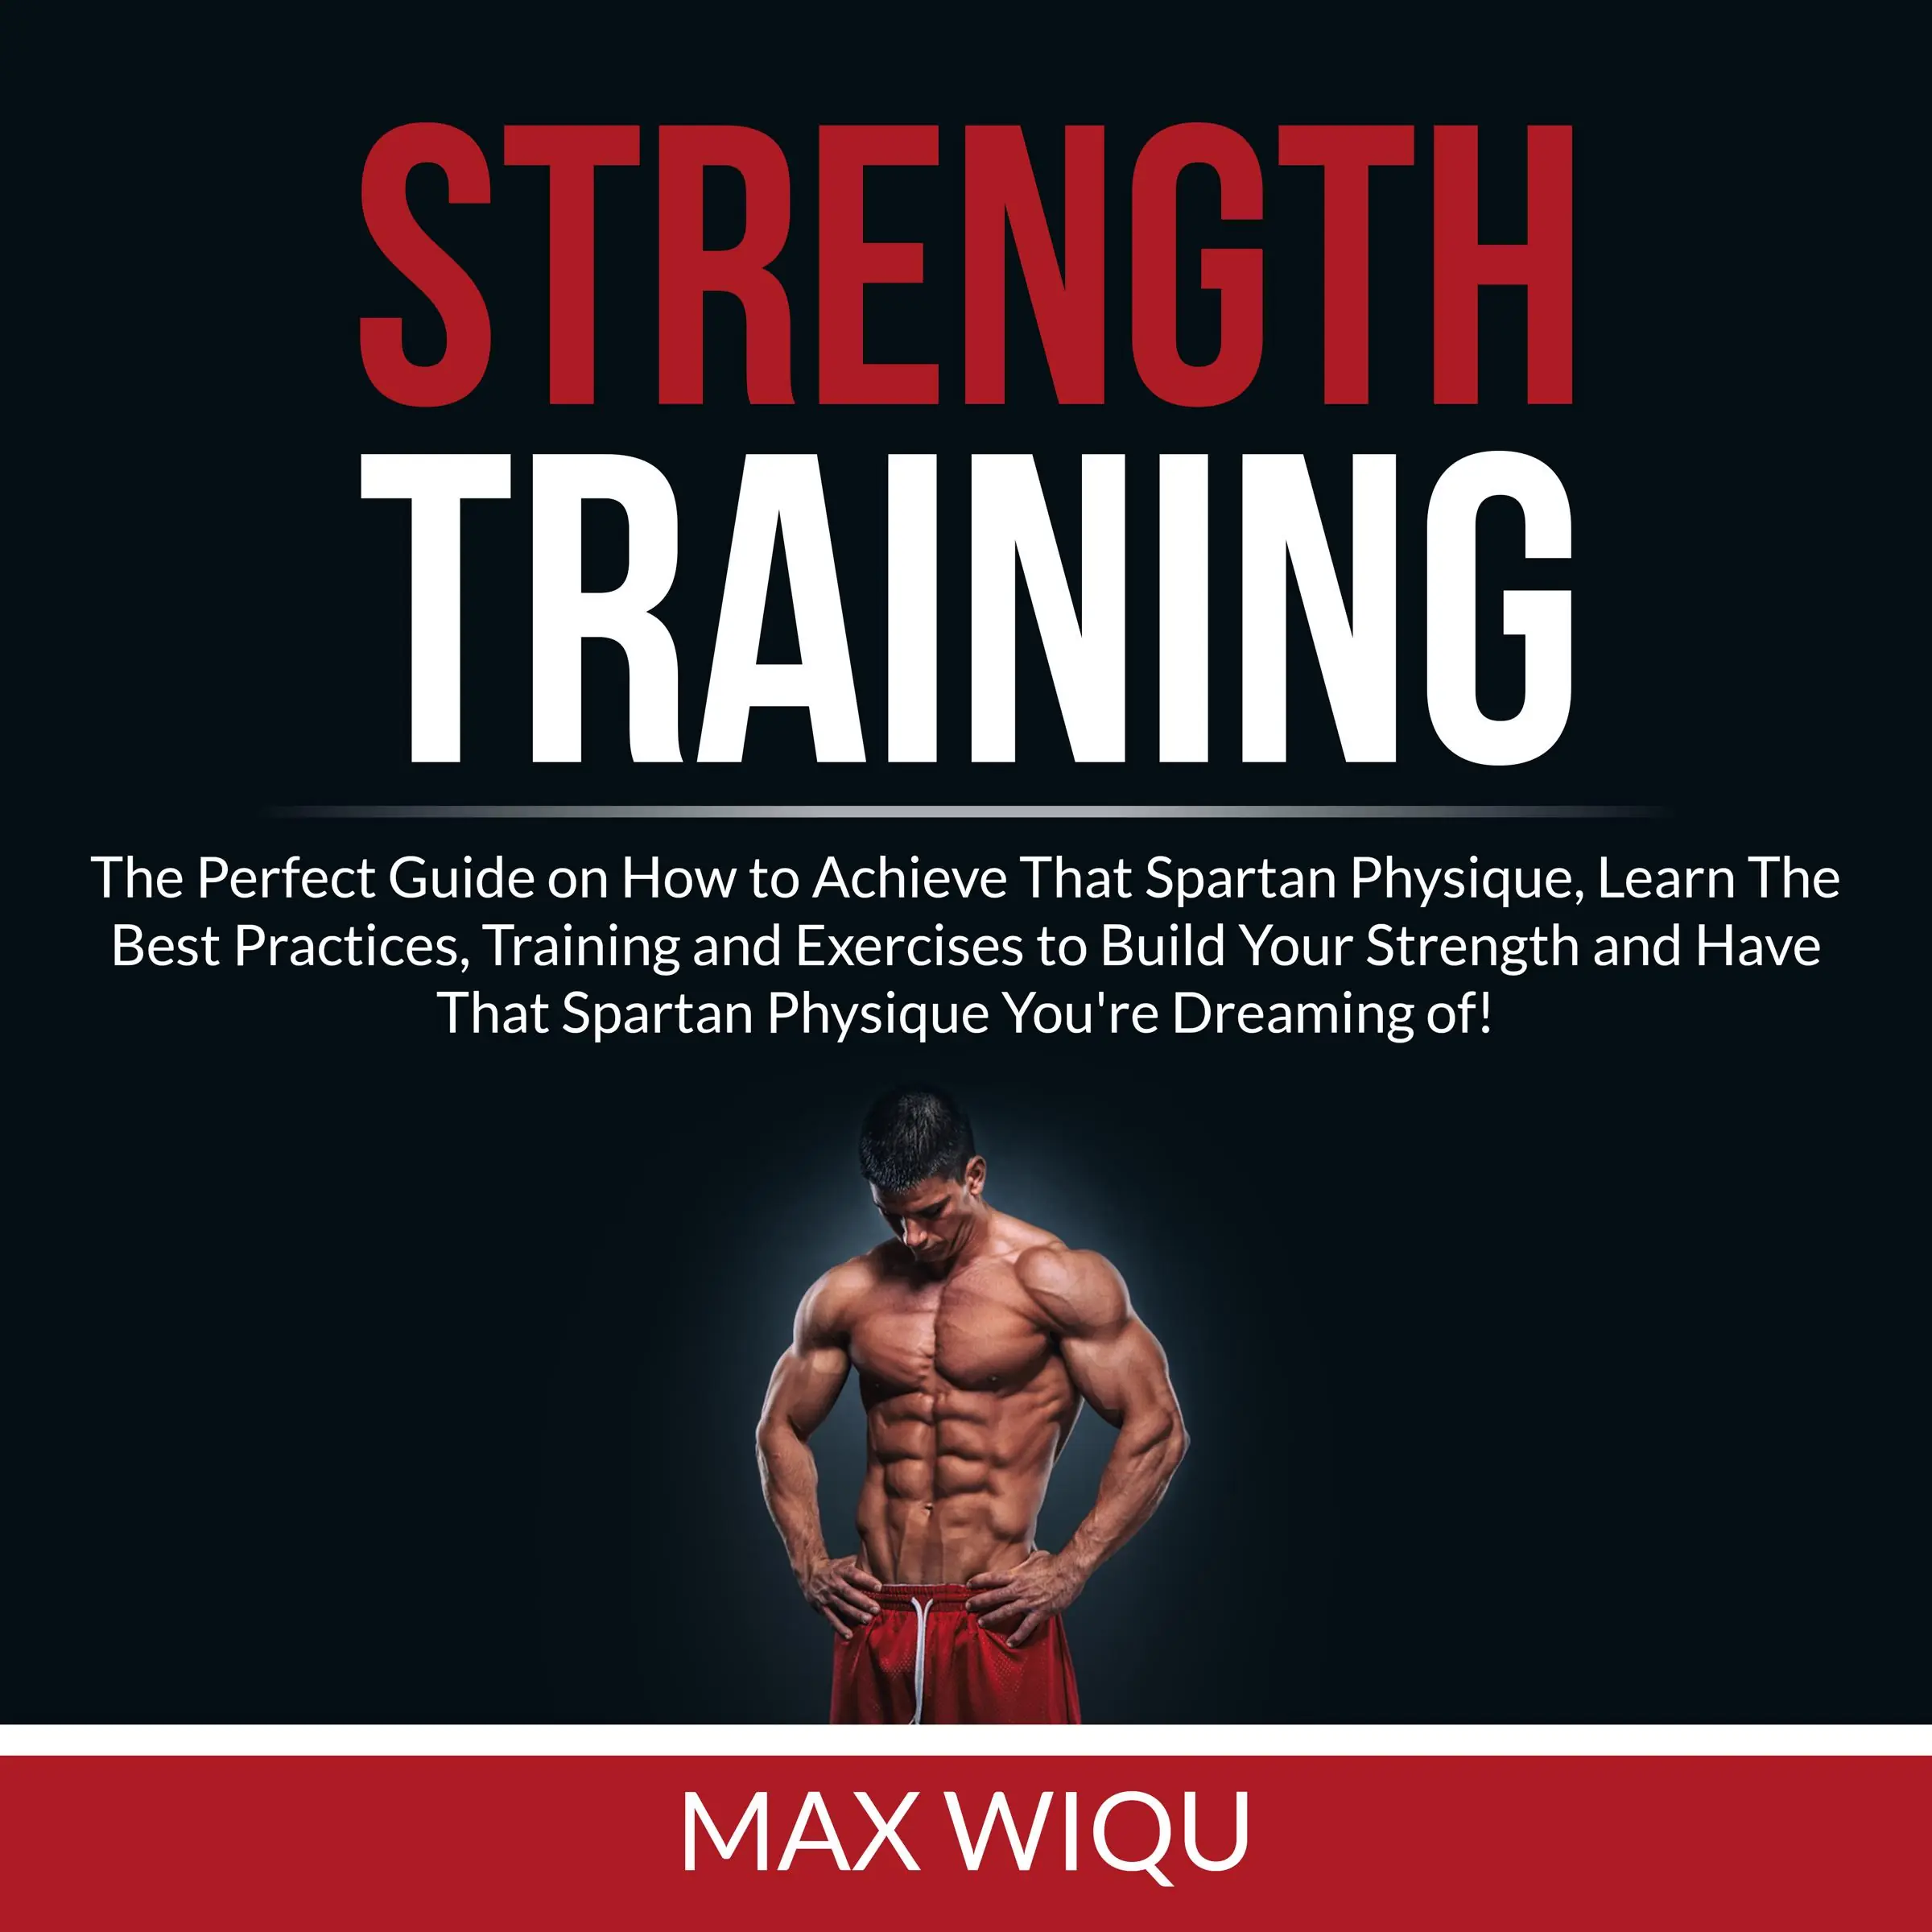 Strength Training: The Perfect Guide on How to Achieve That Spartan Physique, Learn The Best Practices, Training and Exercises to Build Your Strength and Have That Spartan Physique You're Dreaming of by Max Wiqu Audiobook